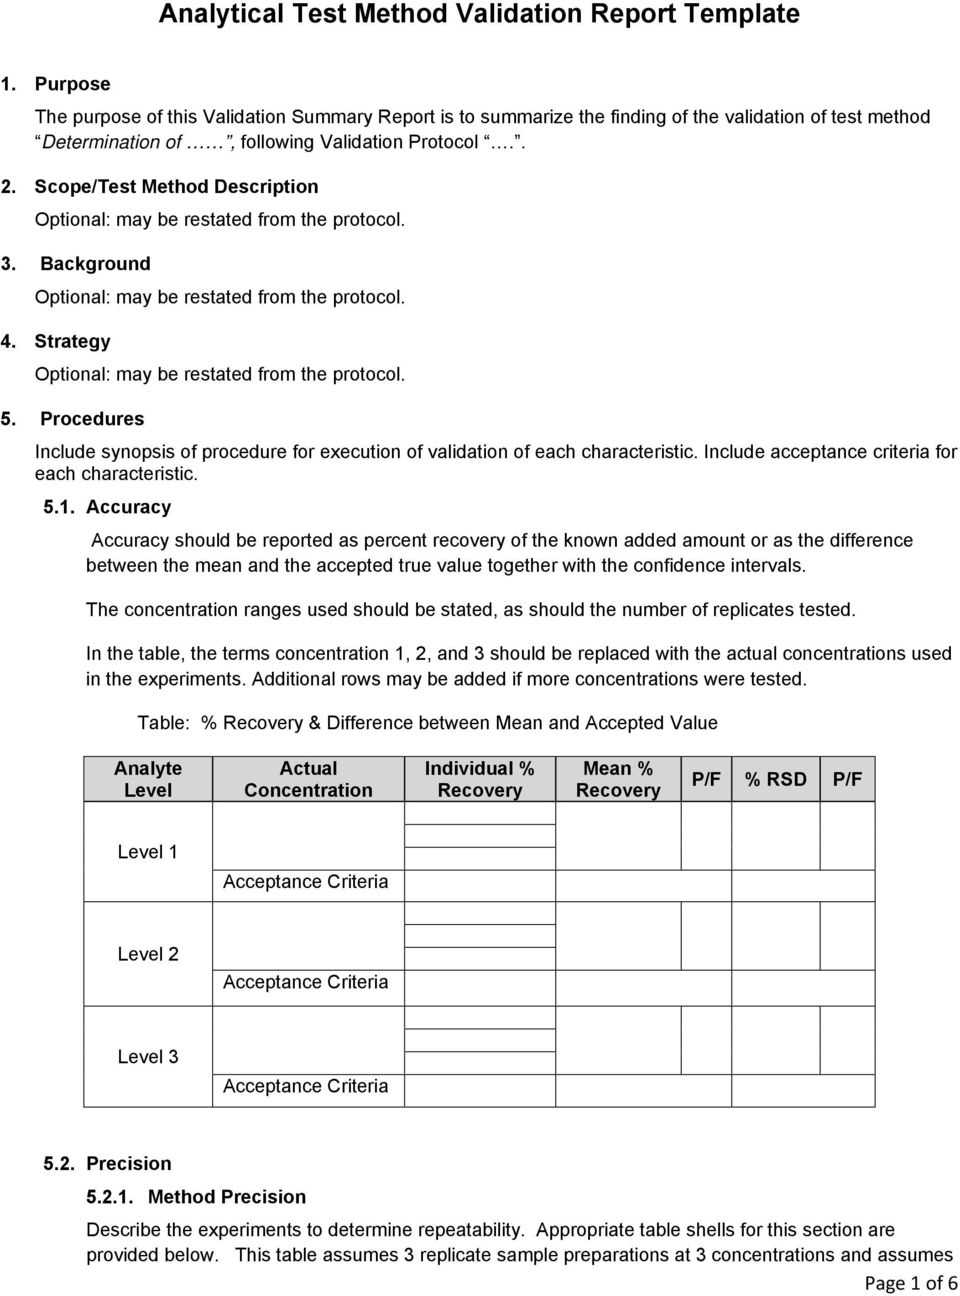 Analytical Test Method Validation Report Template – Pdf Free With Regard To Analytical Report Template